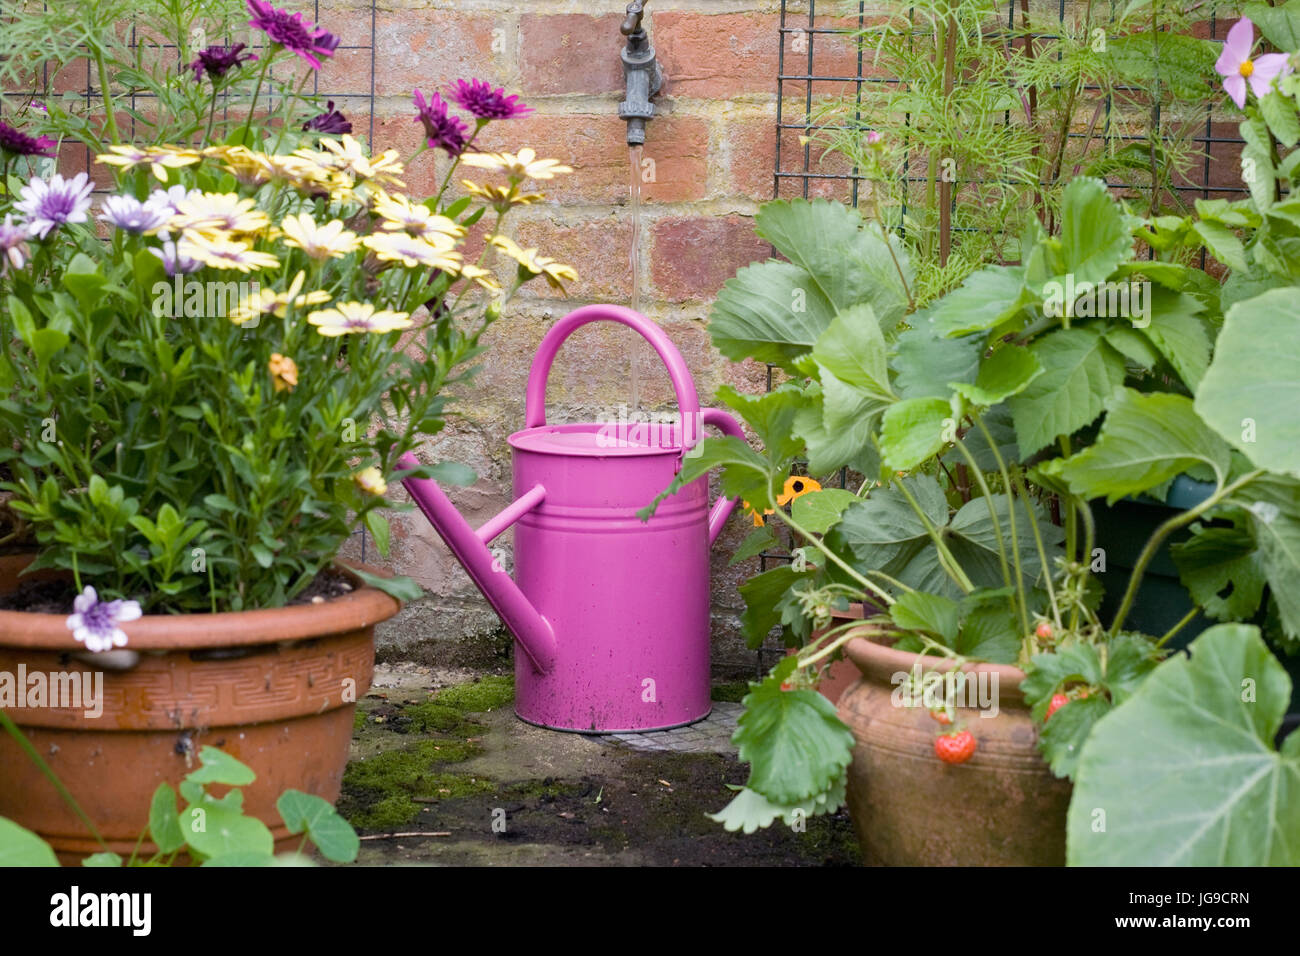 Watering the pots in Summer. Stock Photo